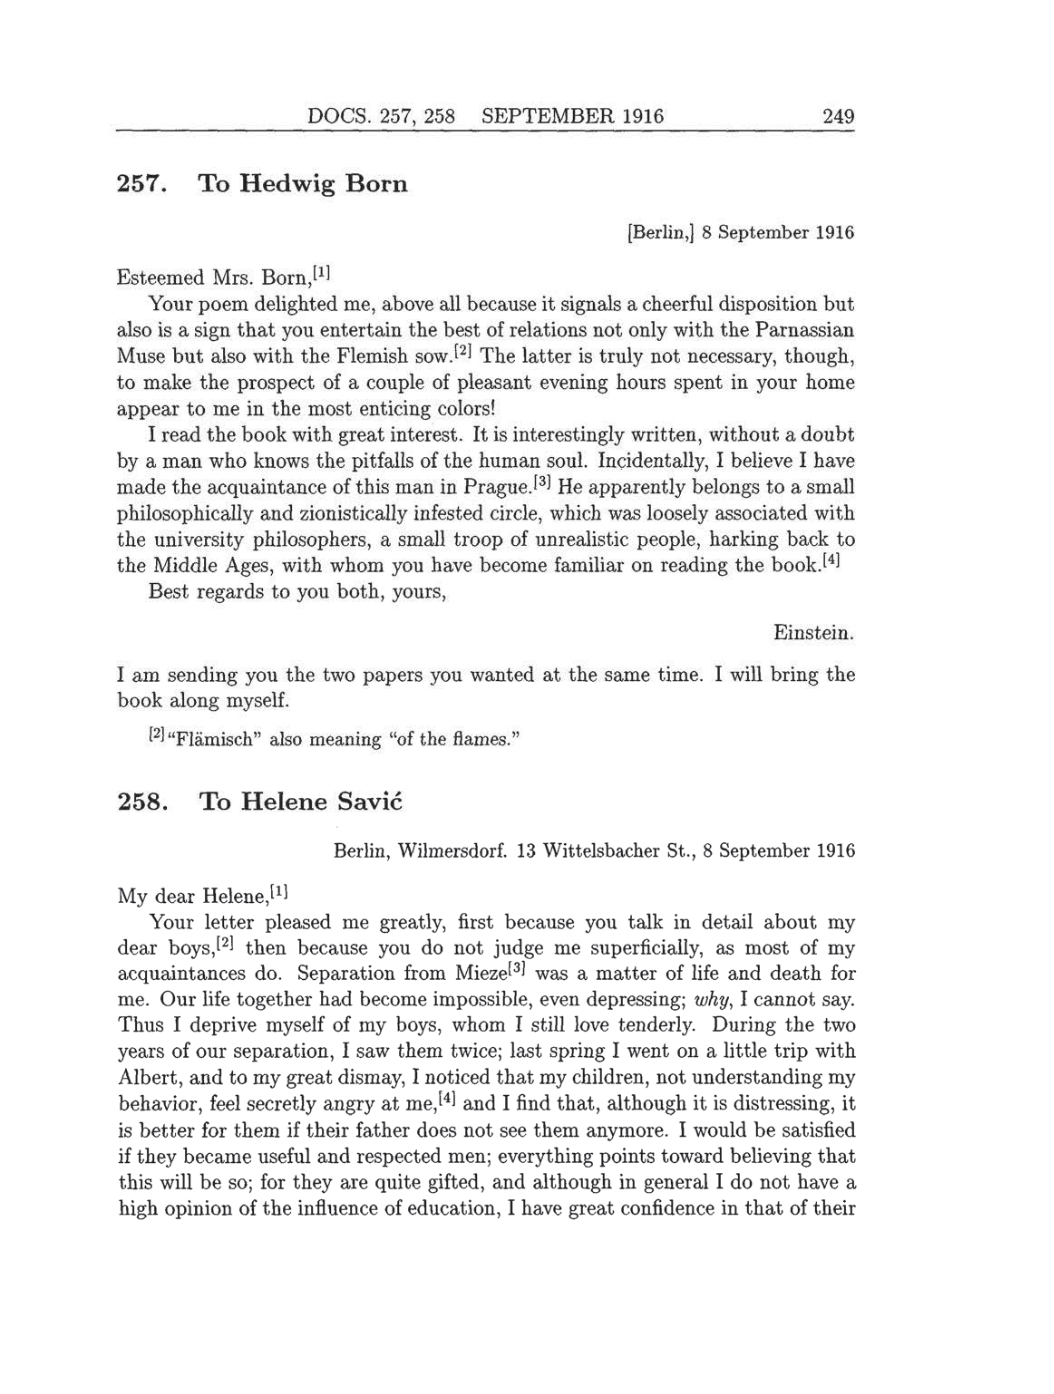 Volume 8: The Berlin Years: Correspondence, 1914-1918 (English translation supplement) page 249